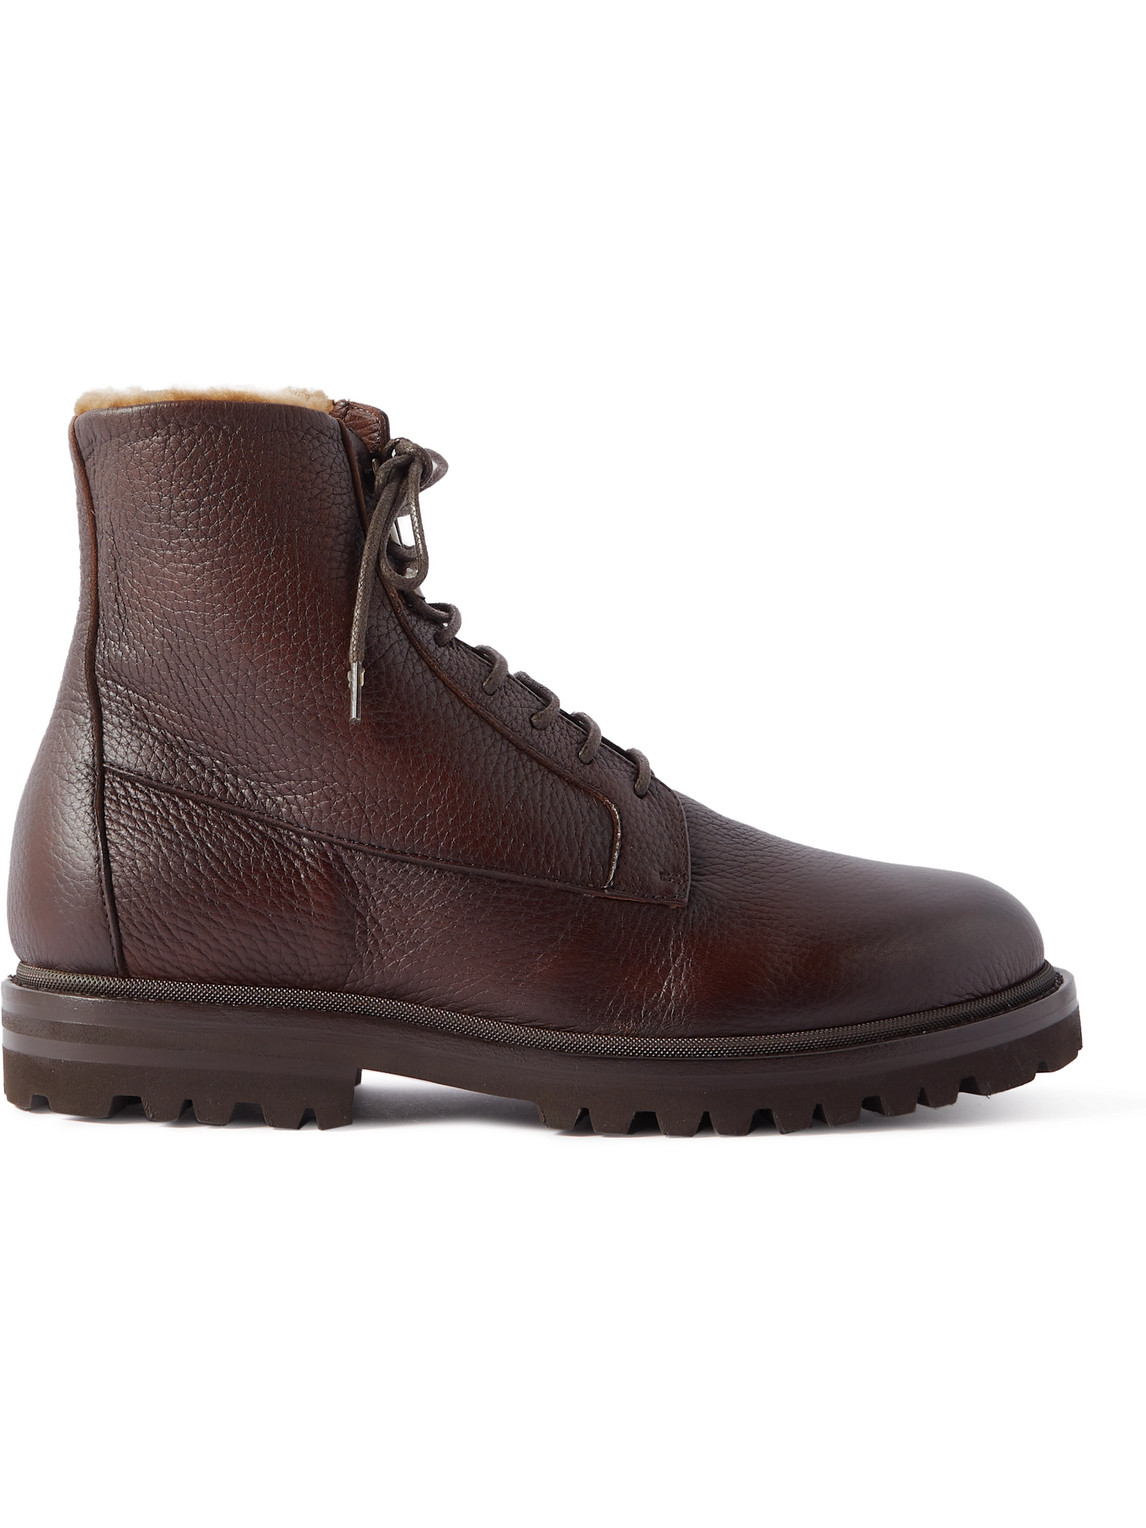 BRUNELLO CUCINELLI SHEARLING-LINED FULL-GRAIN LEATHER BOOTS